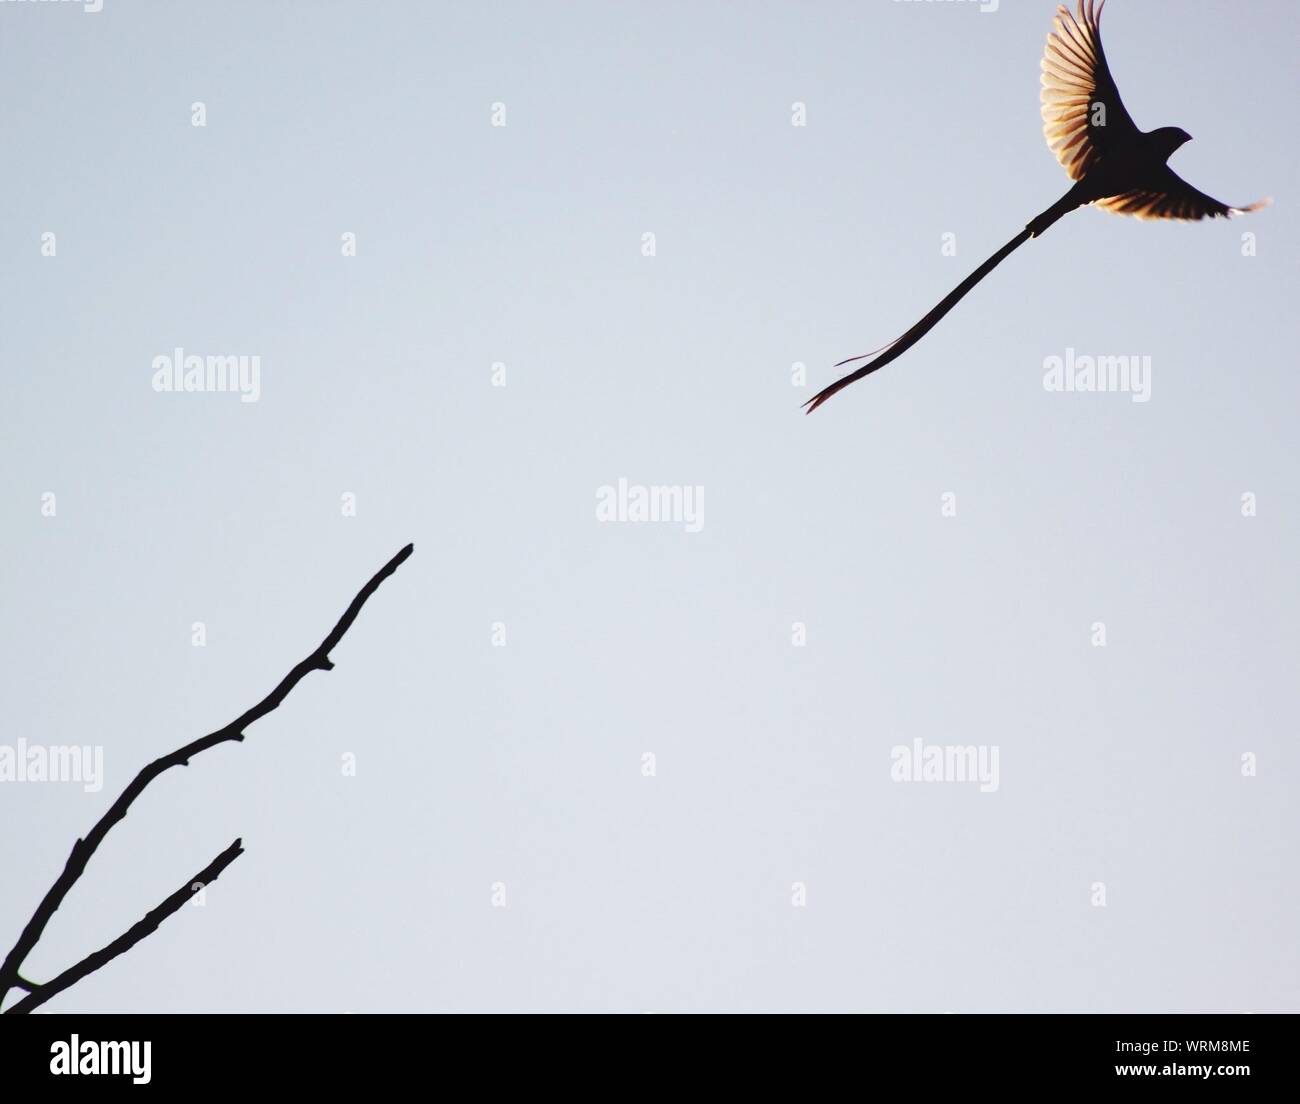 Bird With Long Tail Flying Away Stock Photo